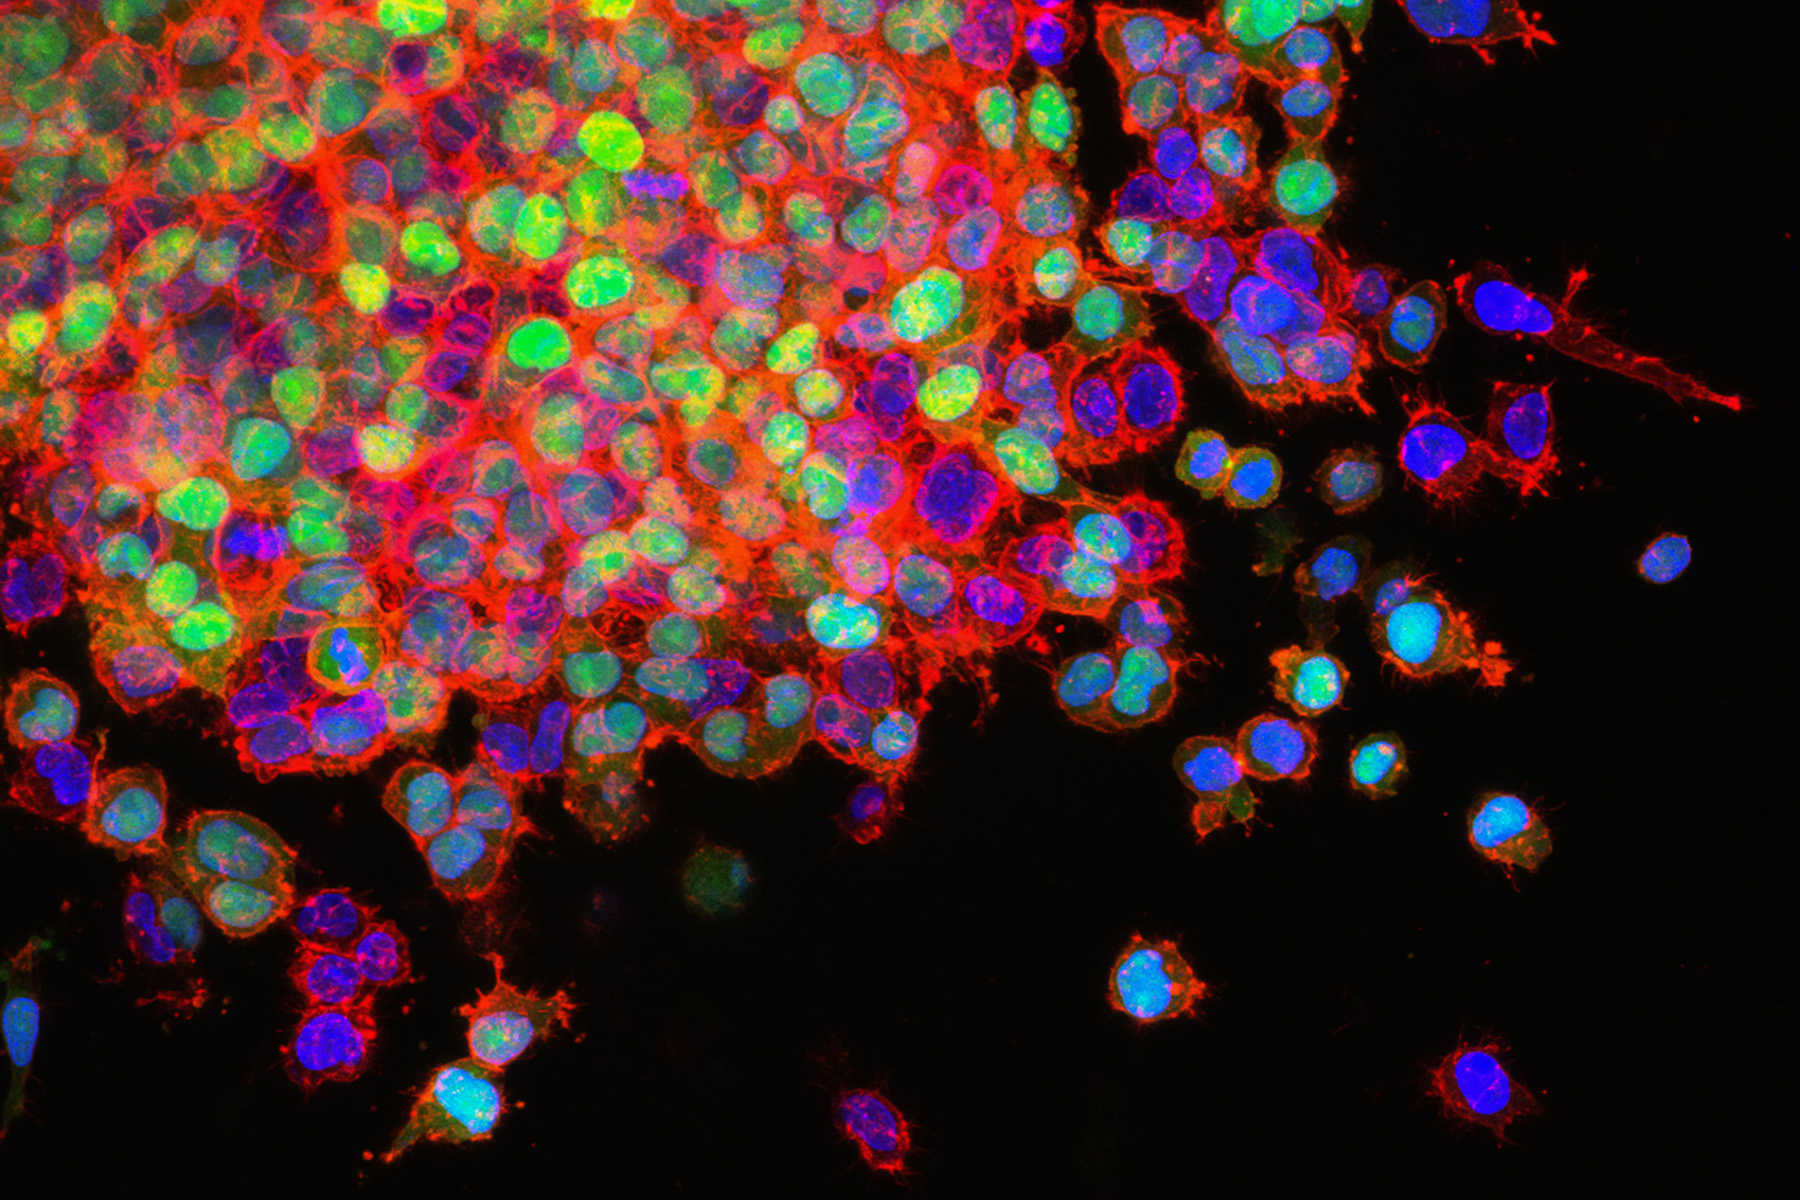 Image of cancer cells from the National Cancer Institute